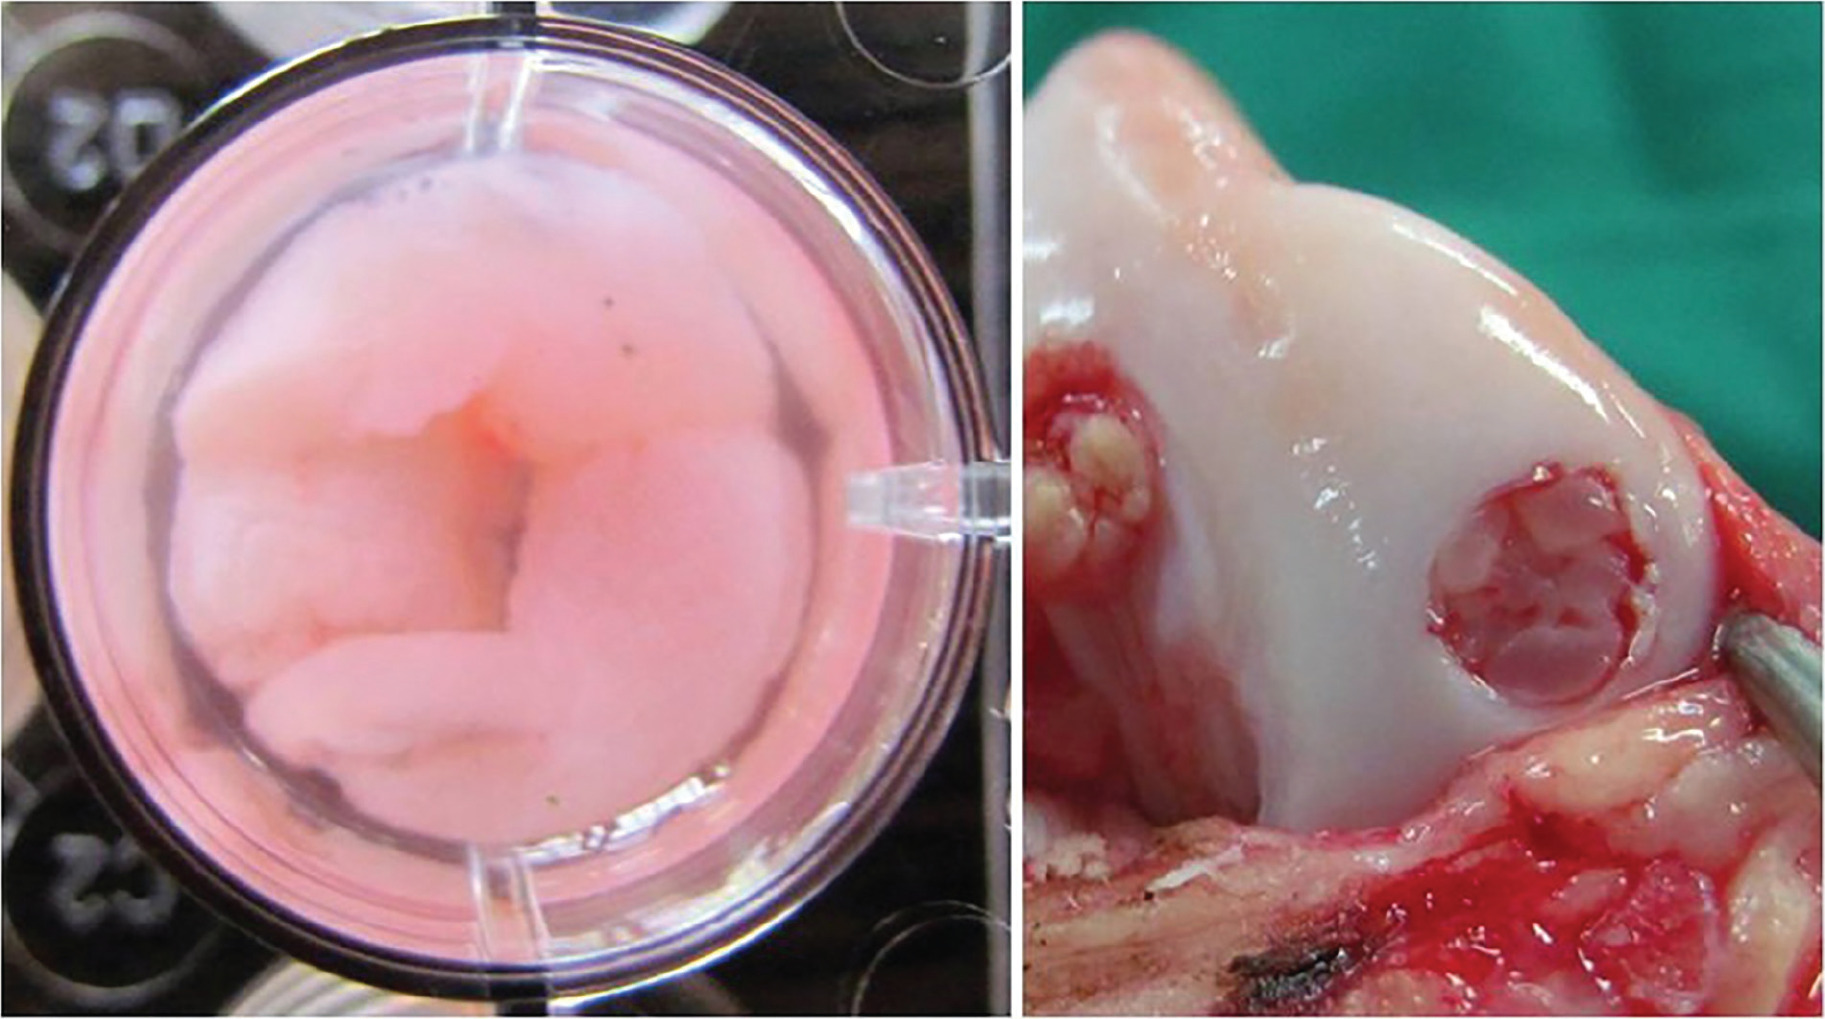 Fig. 1 
            Platelet-rich fibrin (PRF) seeded with stem cells. Bone marrow derived mesenchymal stem cells were seeded onto PRF in the laboratory and incubated for 6 hours (left) before being press fitted inside the cartilage defects (right).
          